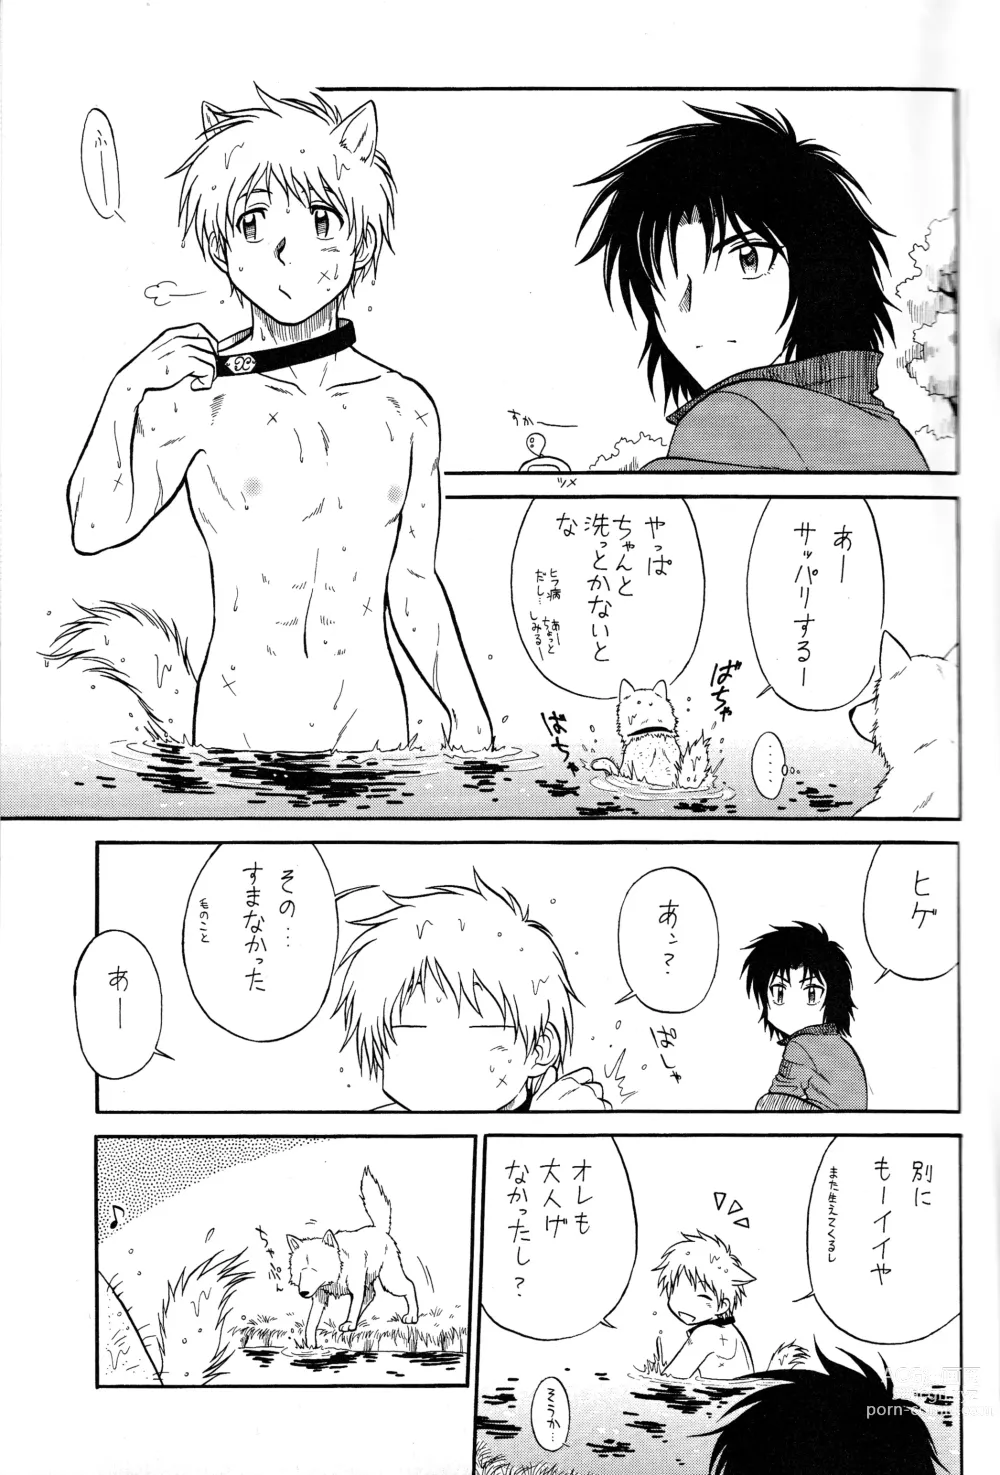 Page 9 of doujinshi K to H